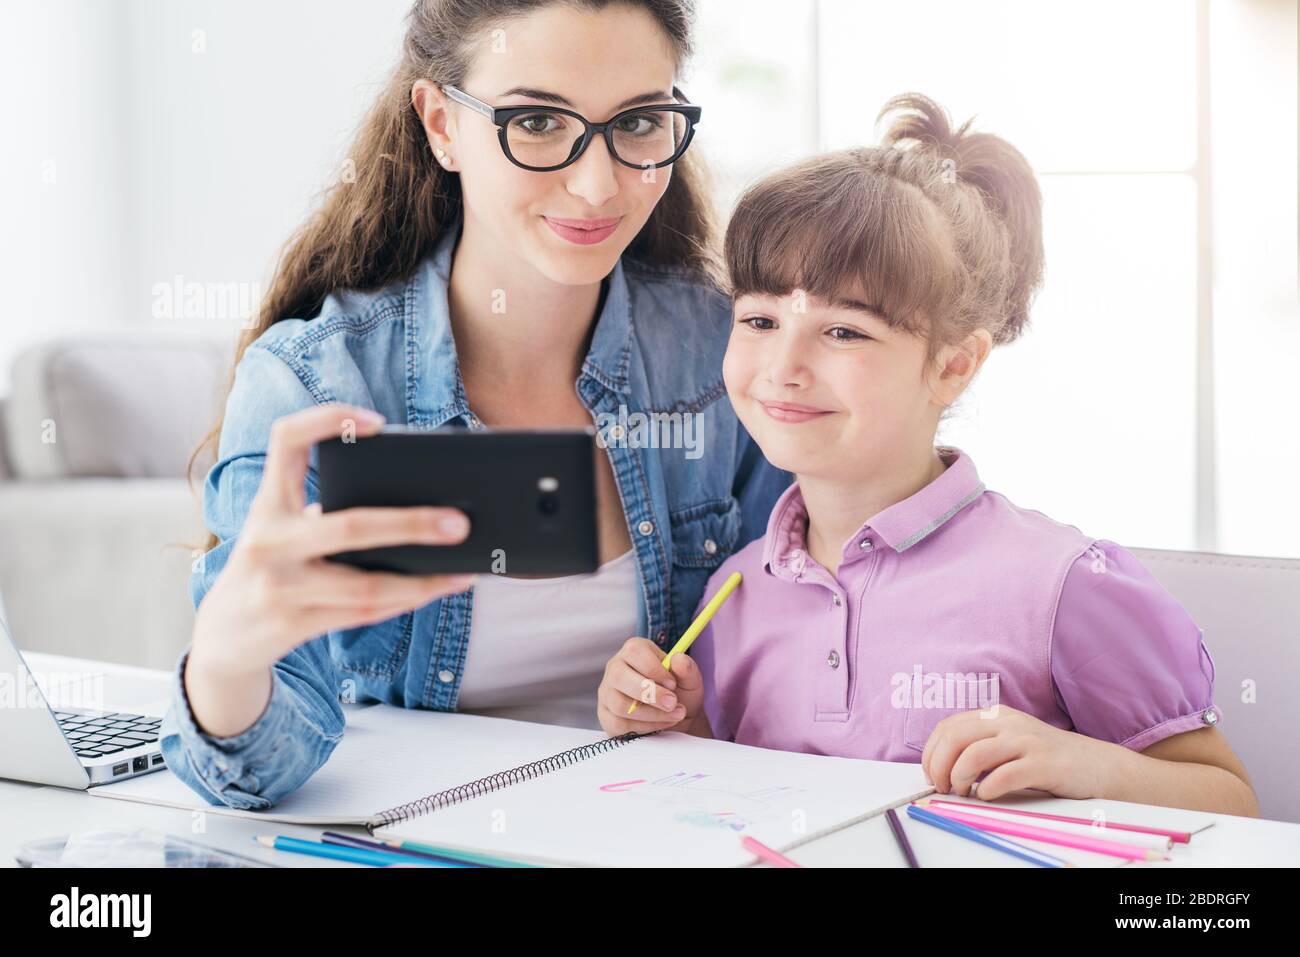 Cute girl and her young mother taking selfies with a smartphone at home, they are smiling and having fun Stock Photo